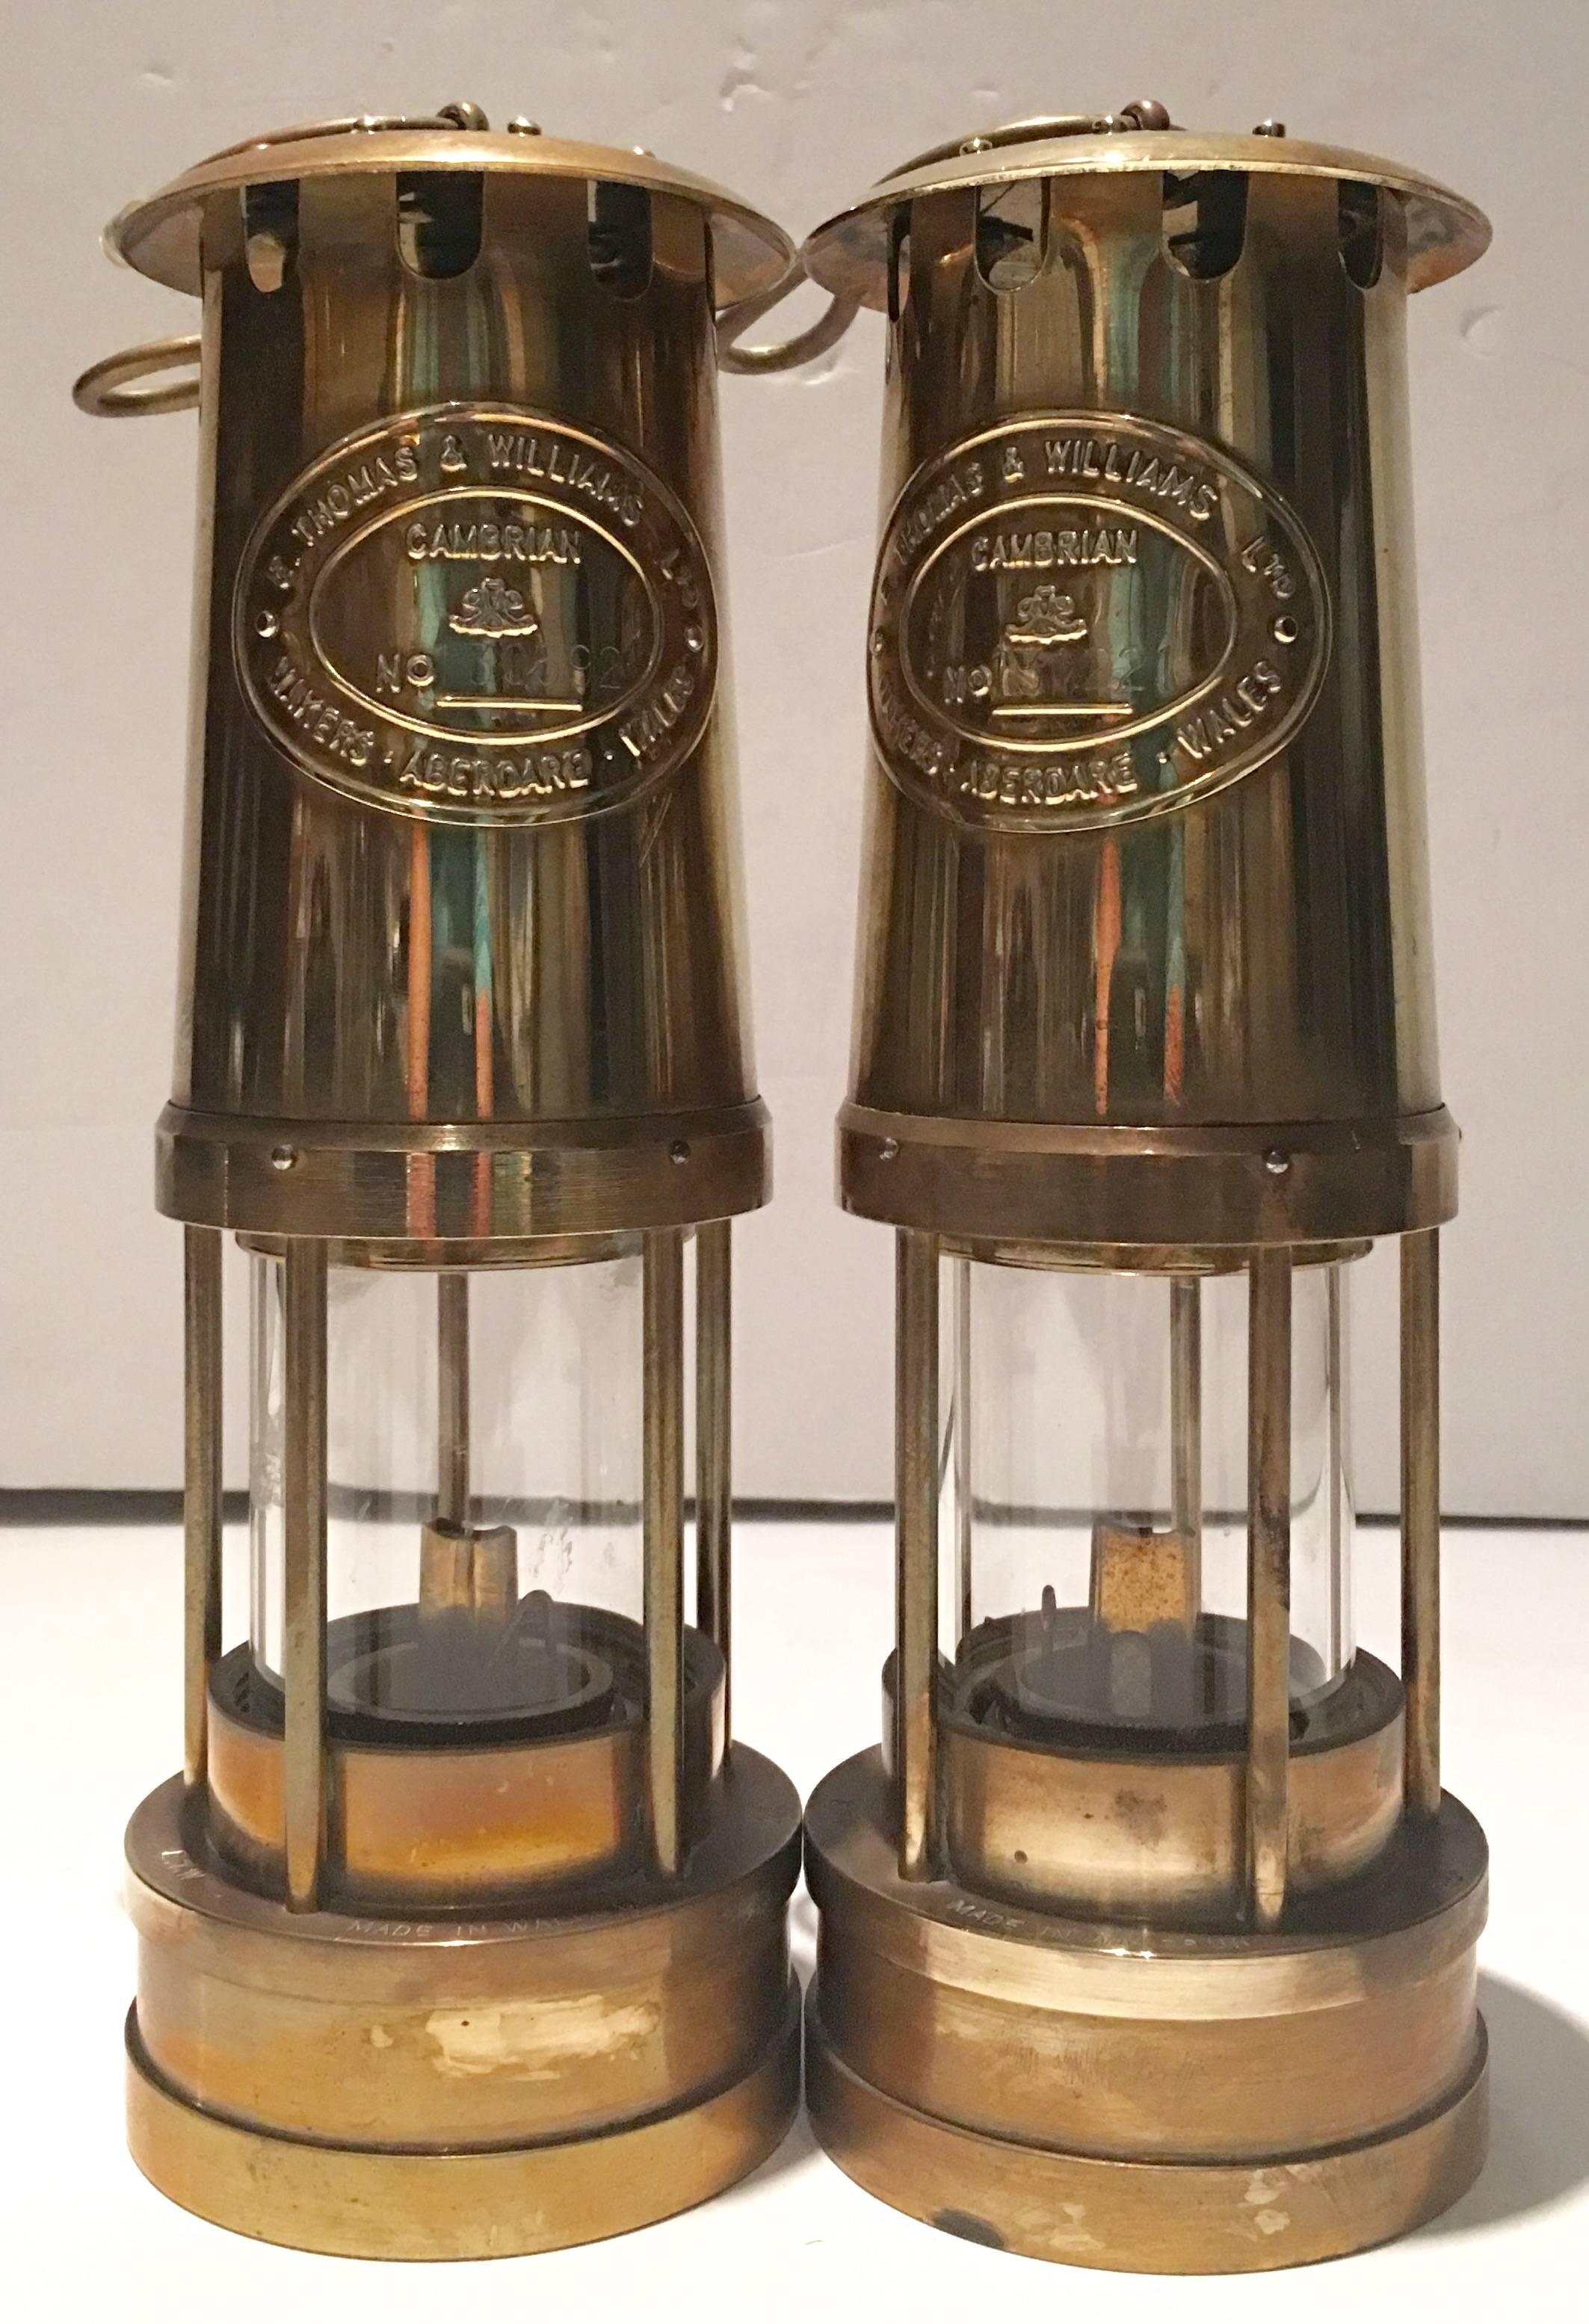 1980s pair of British Cambrian solid brass hanging miners lamps. Each piece has is numbered and dated. Features a milled glass tank with wick. Each lamp includes a solid brass gimbaled wall hook. Can be used as a table lamp or hanging lantern. Each